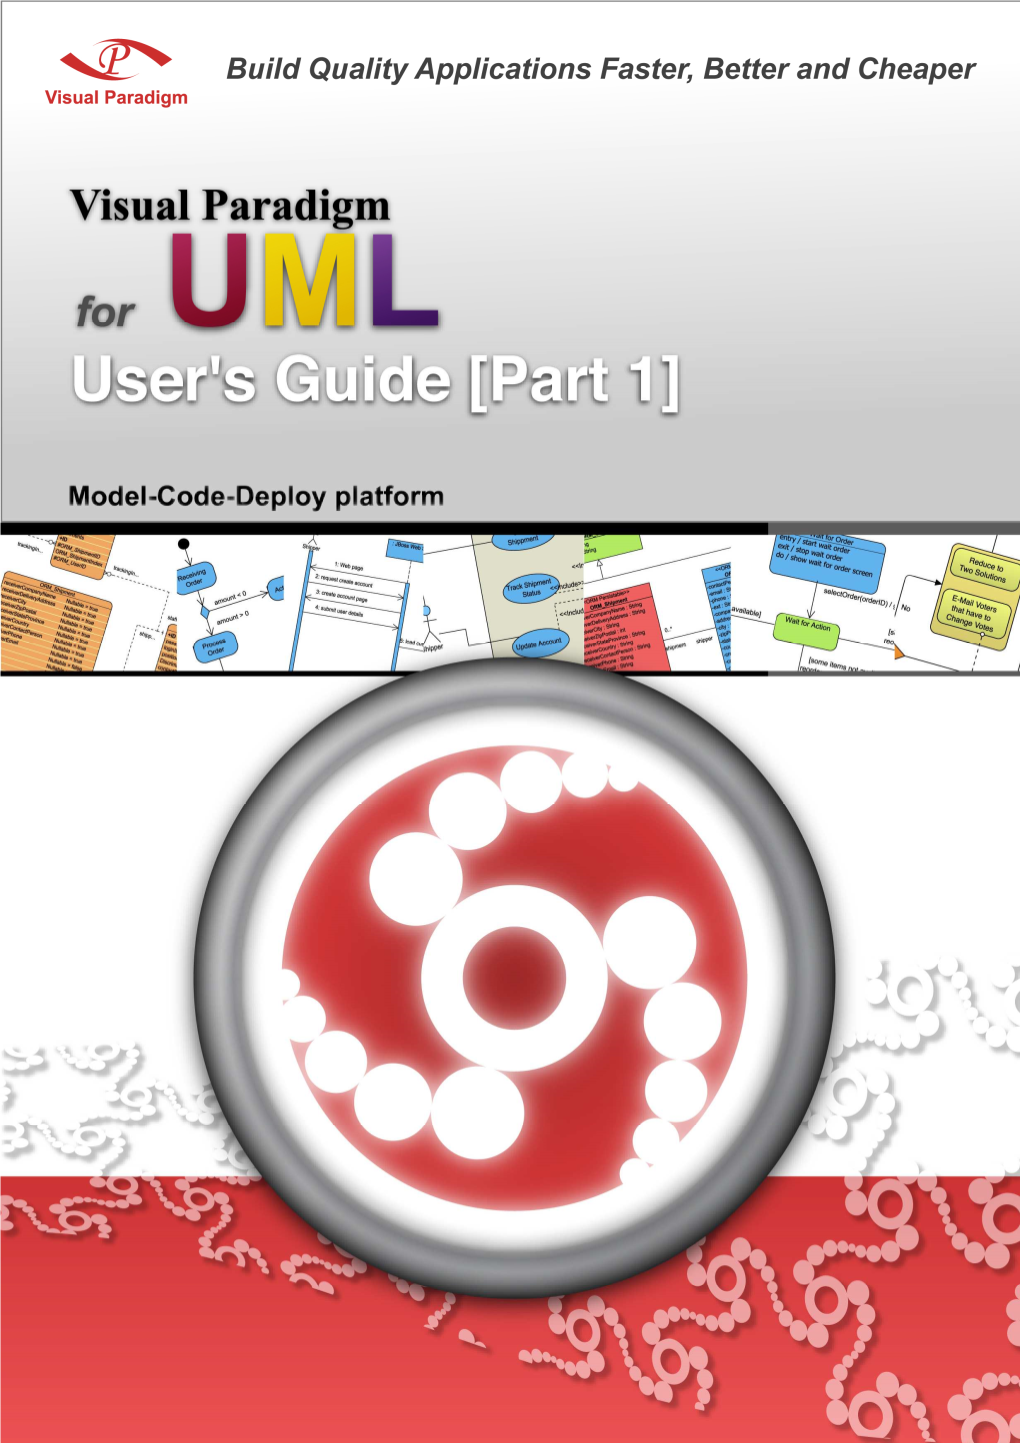 Working with Visual Paradigm for UML